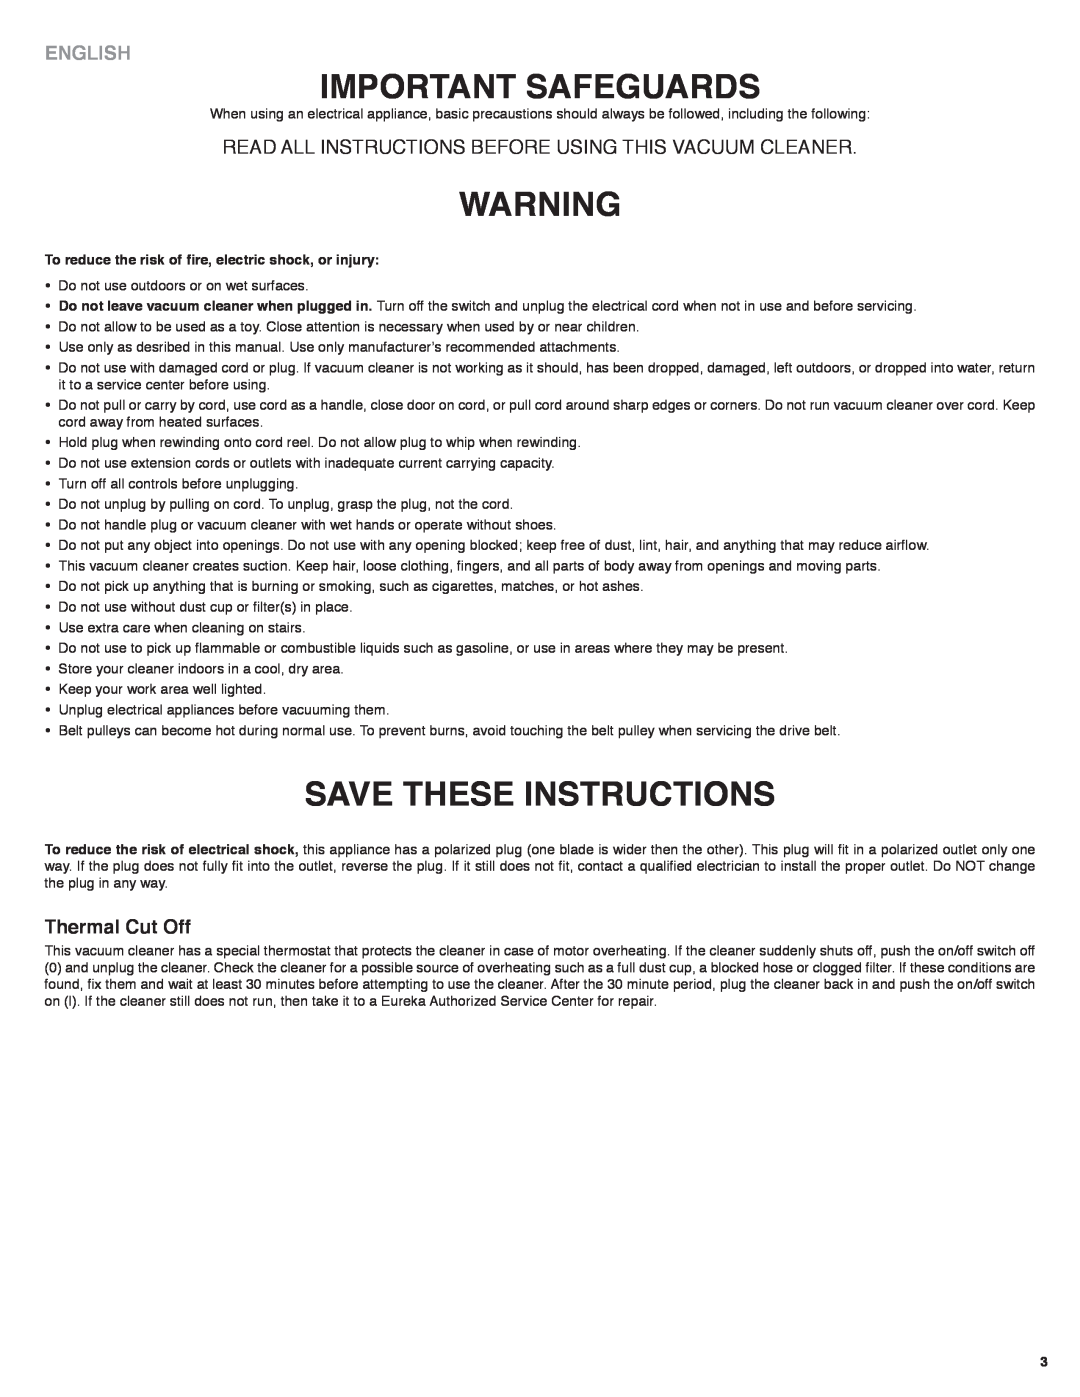 Eureka! Tents 60 ImPoRtant SafeGUaRDS, SaVe tHeSe InStRUCtIonS, Read All Instructions Before Using This Vacuum Cleaner 